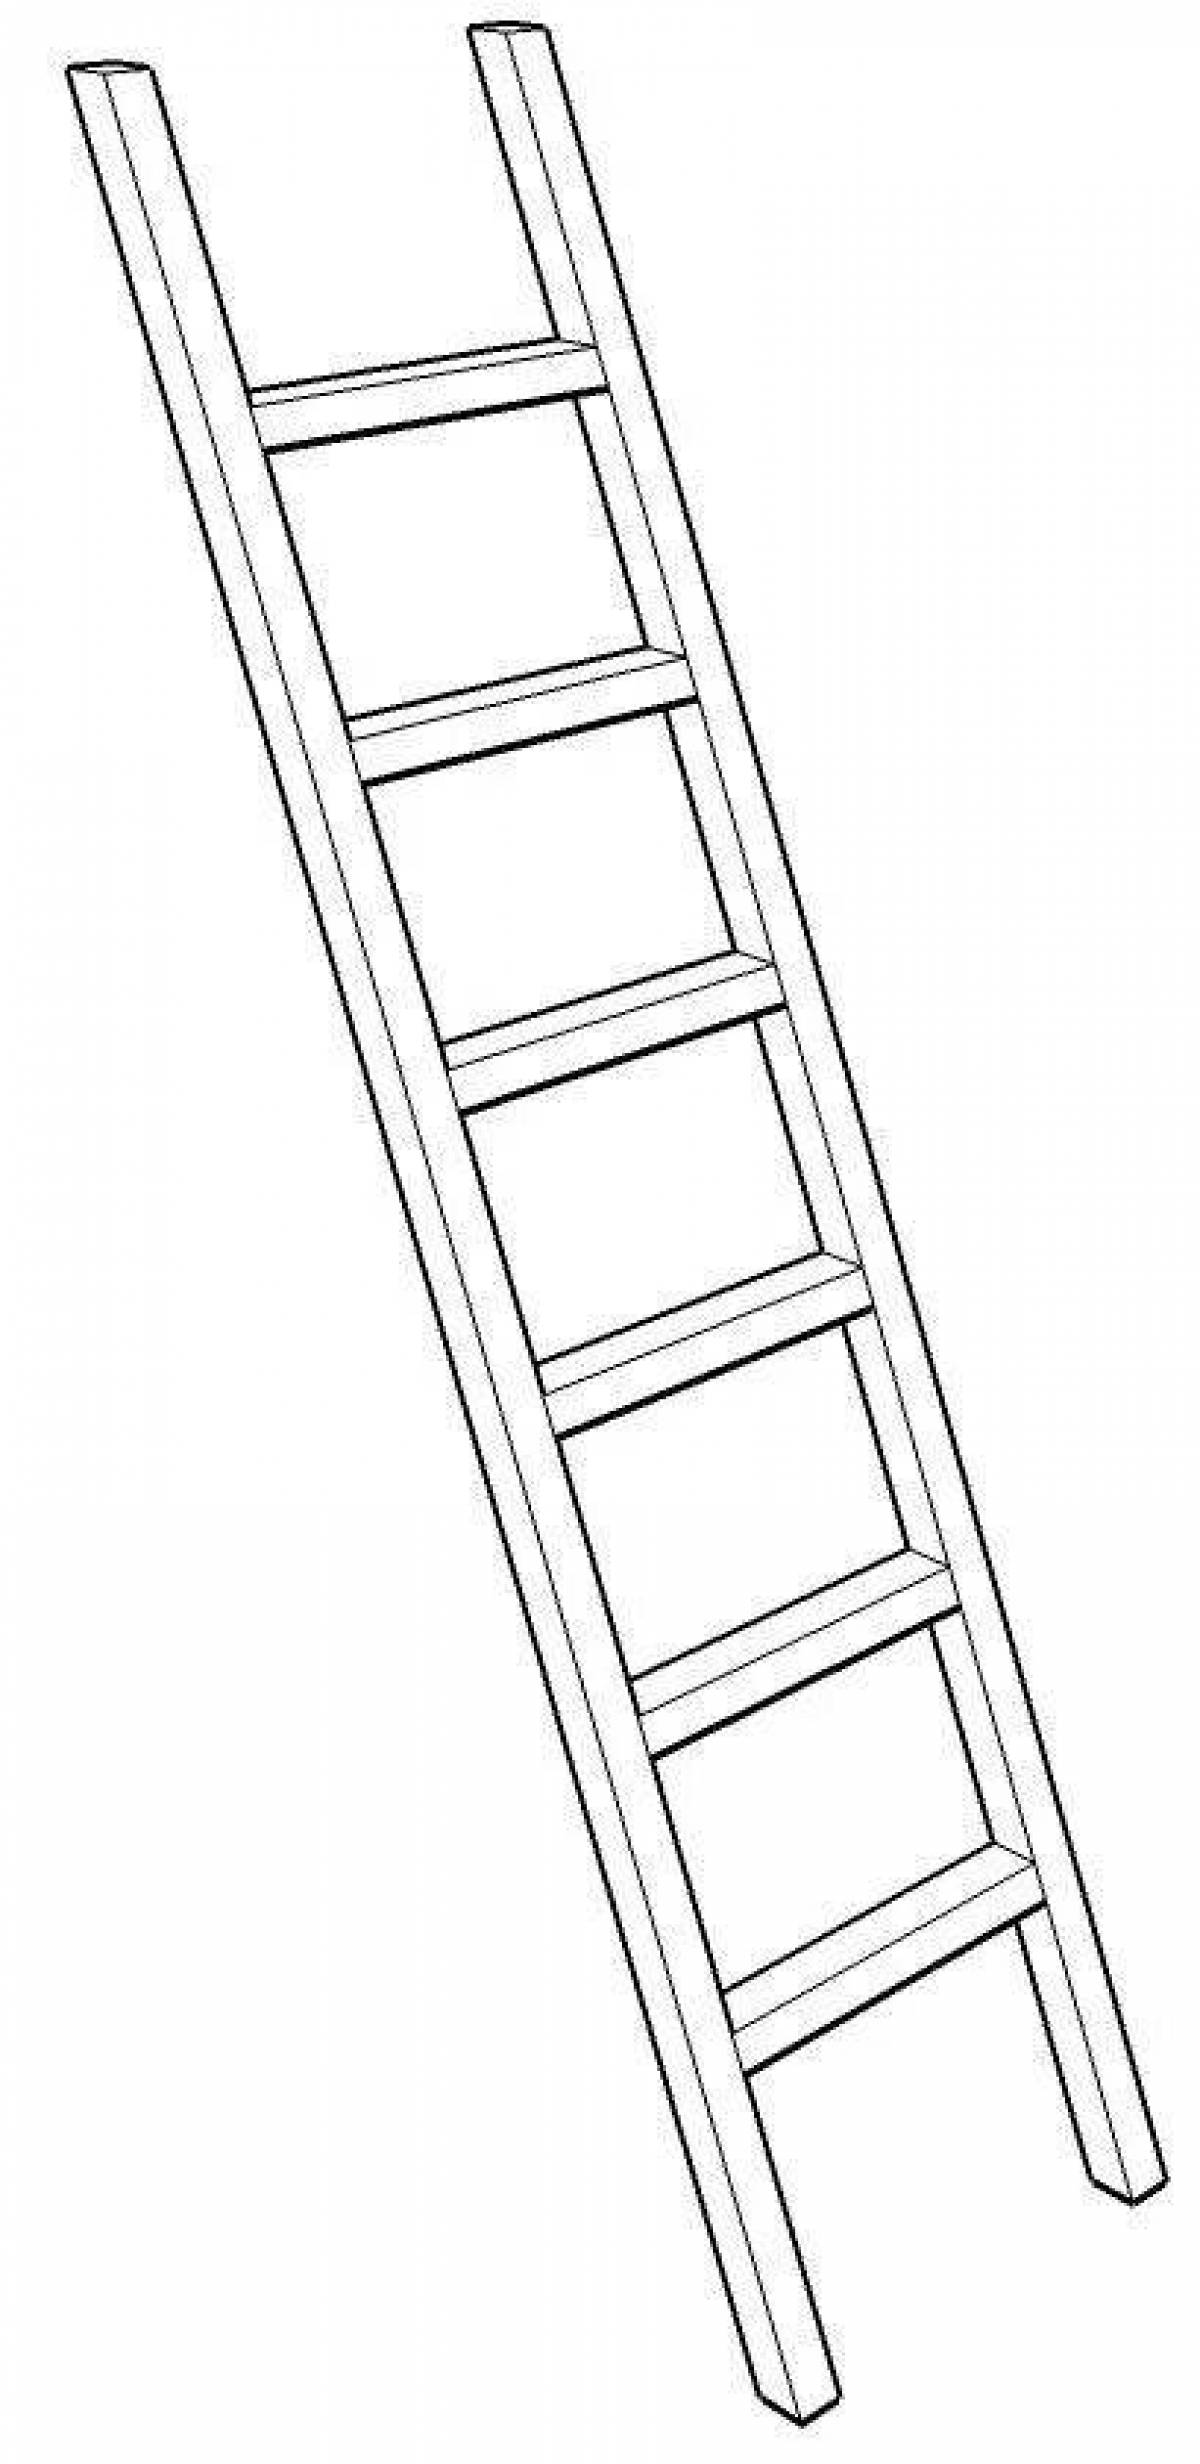 Fun Staircase Coloring Page